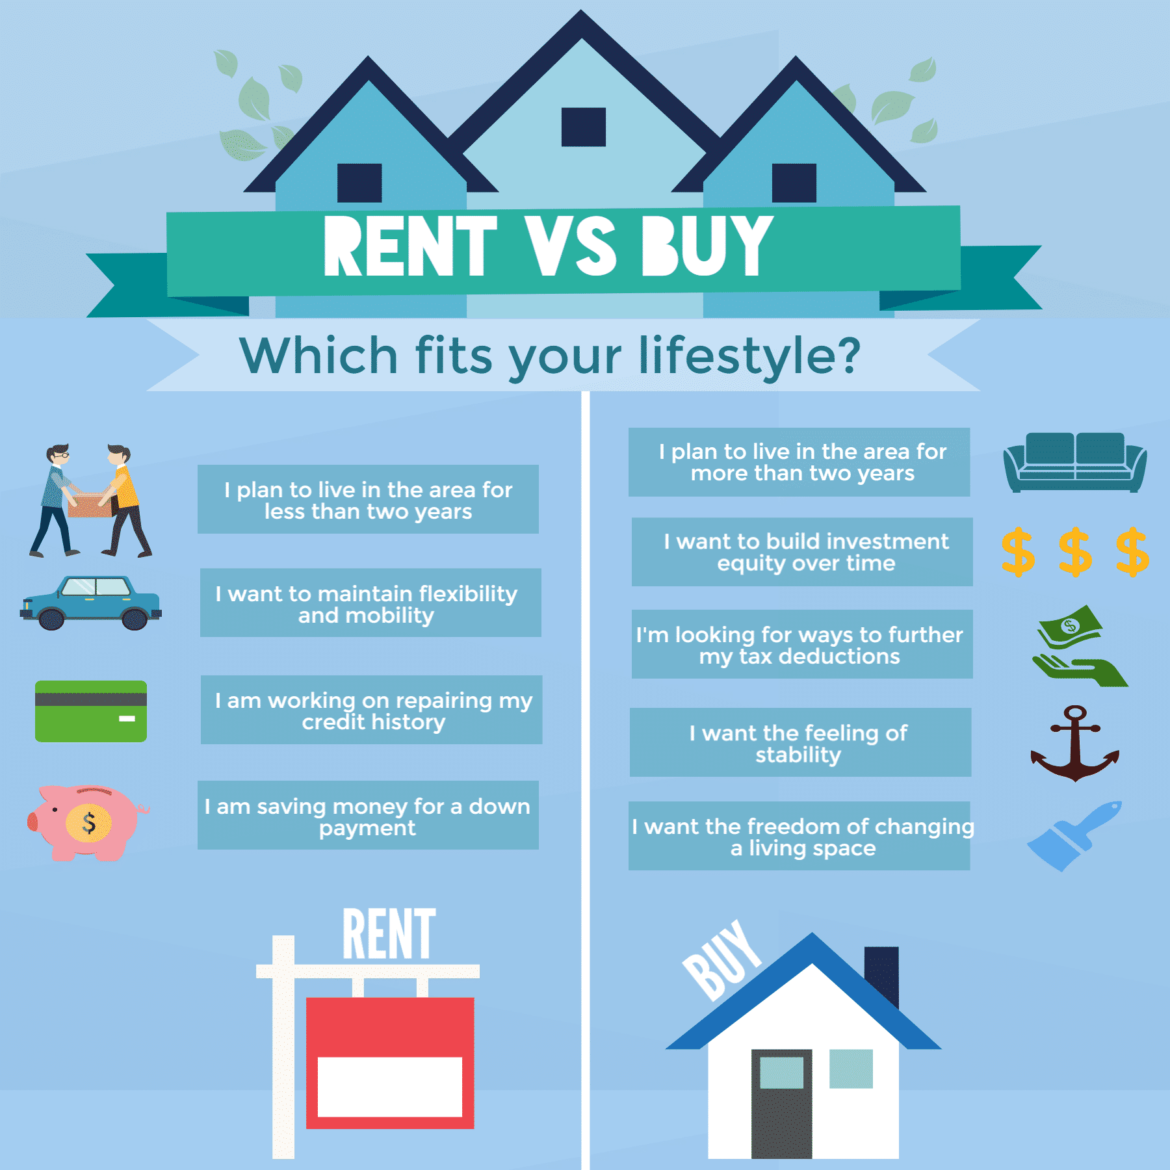 The Benefits of Buying vs. Renting